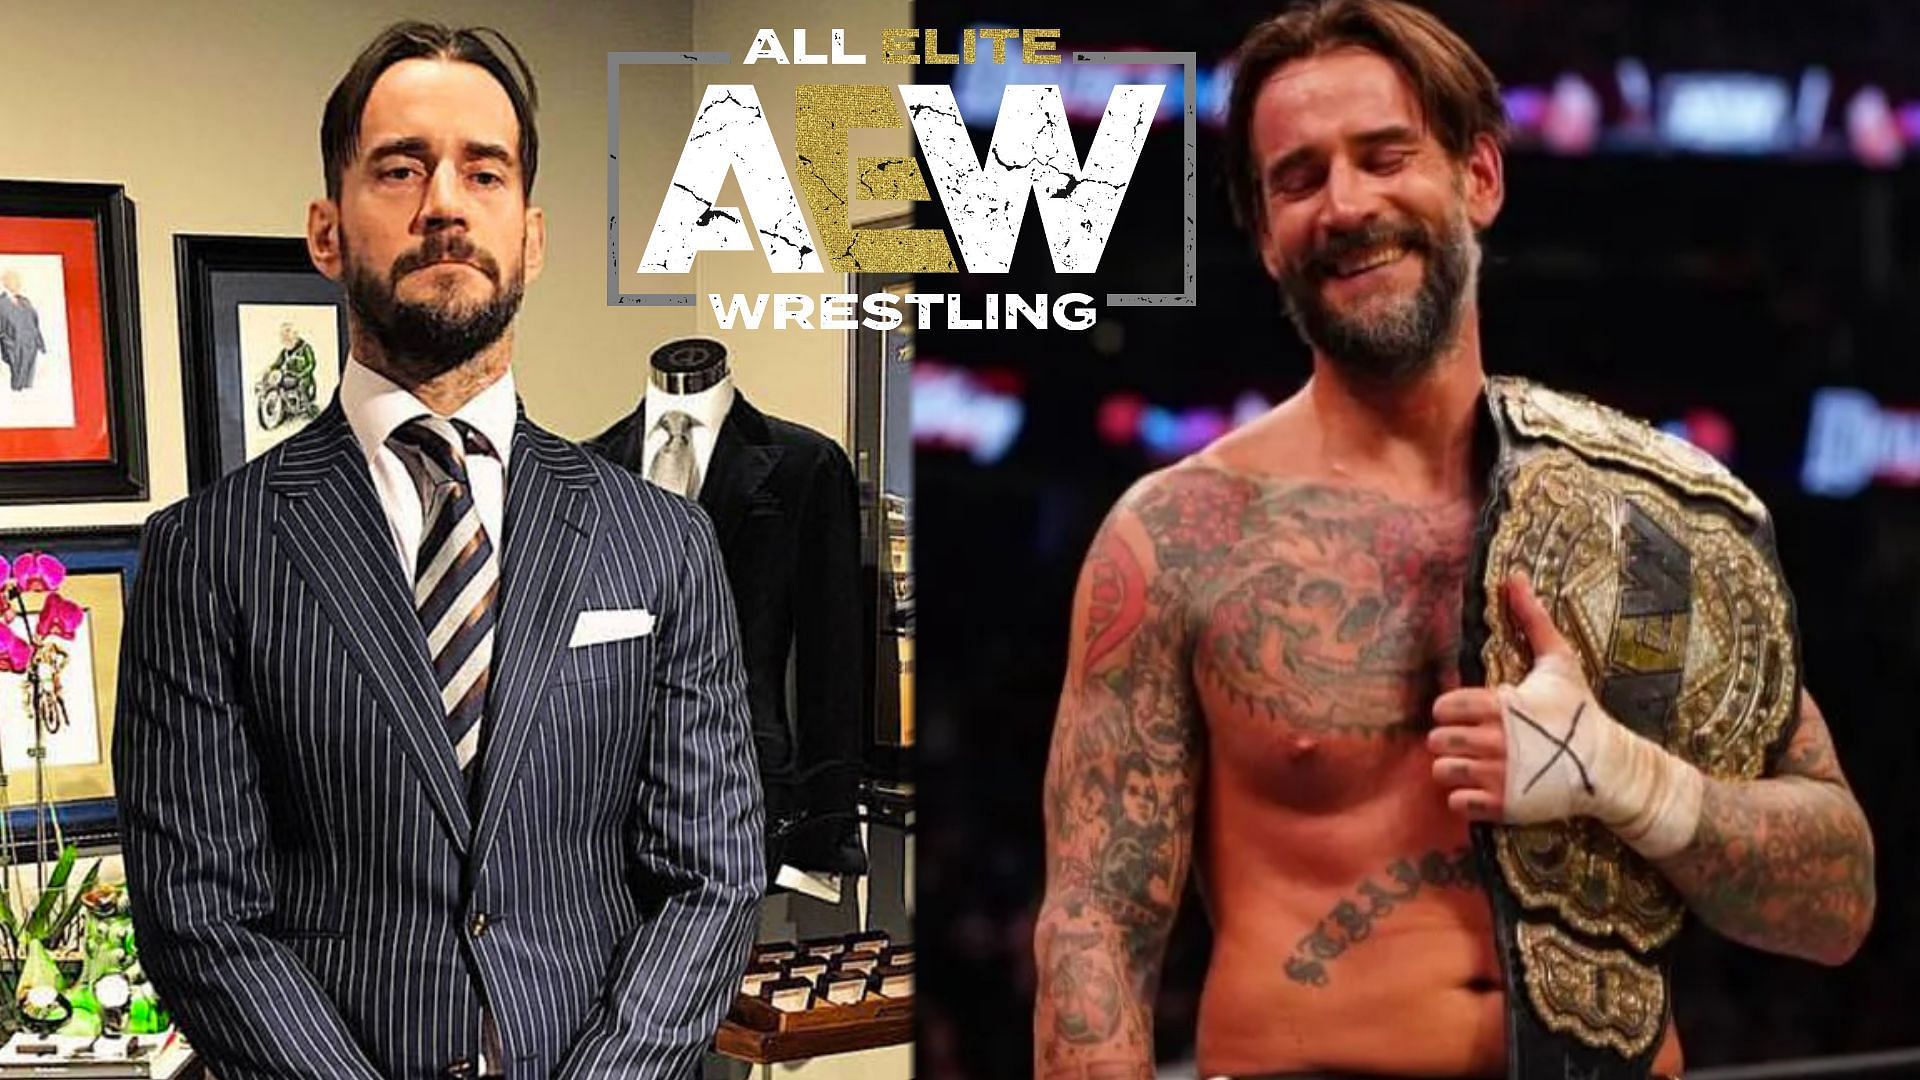 Is Punk deeper rooted in AEW than fans know?